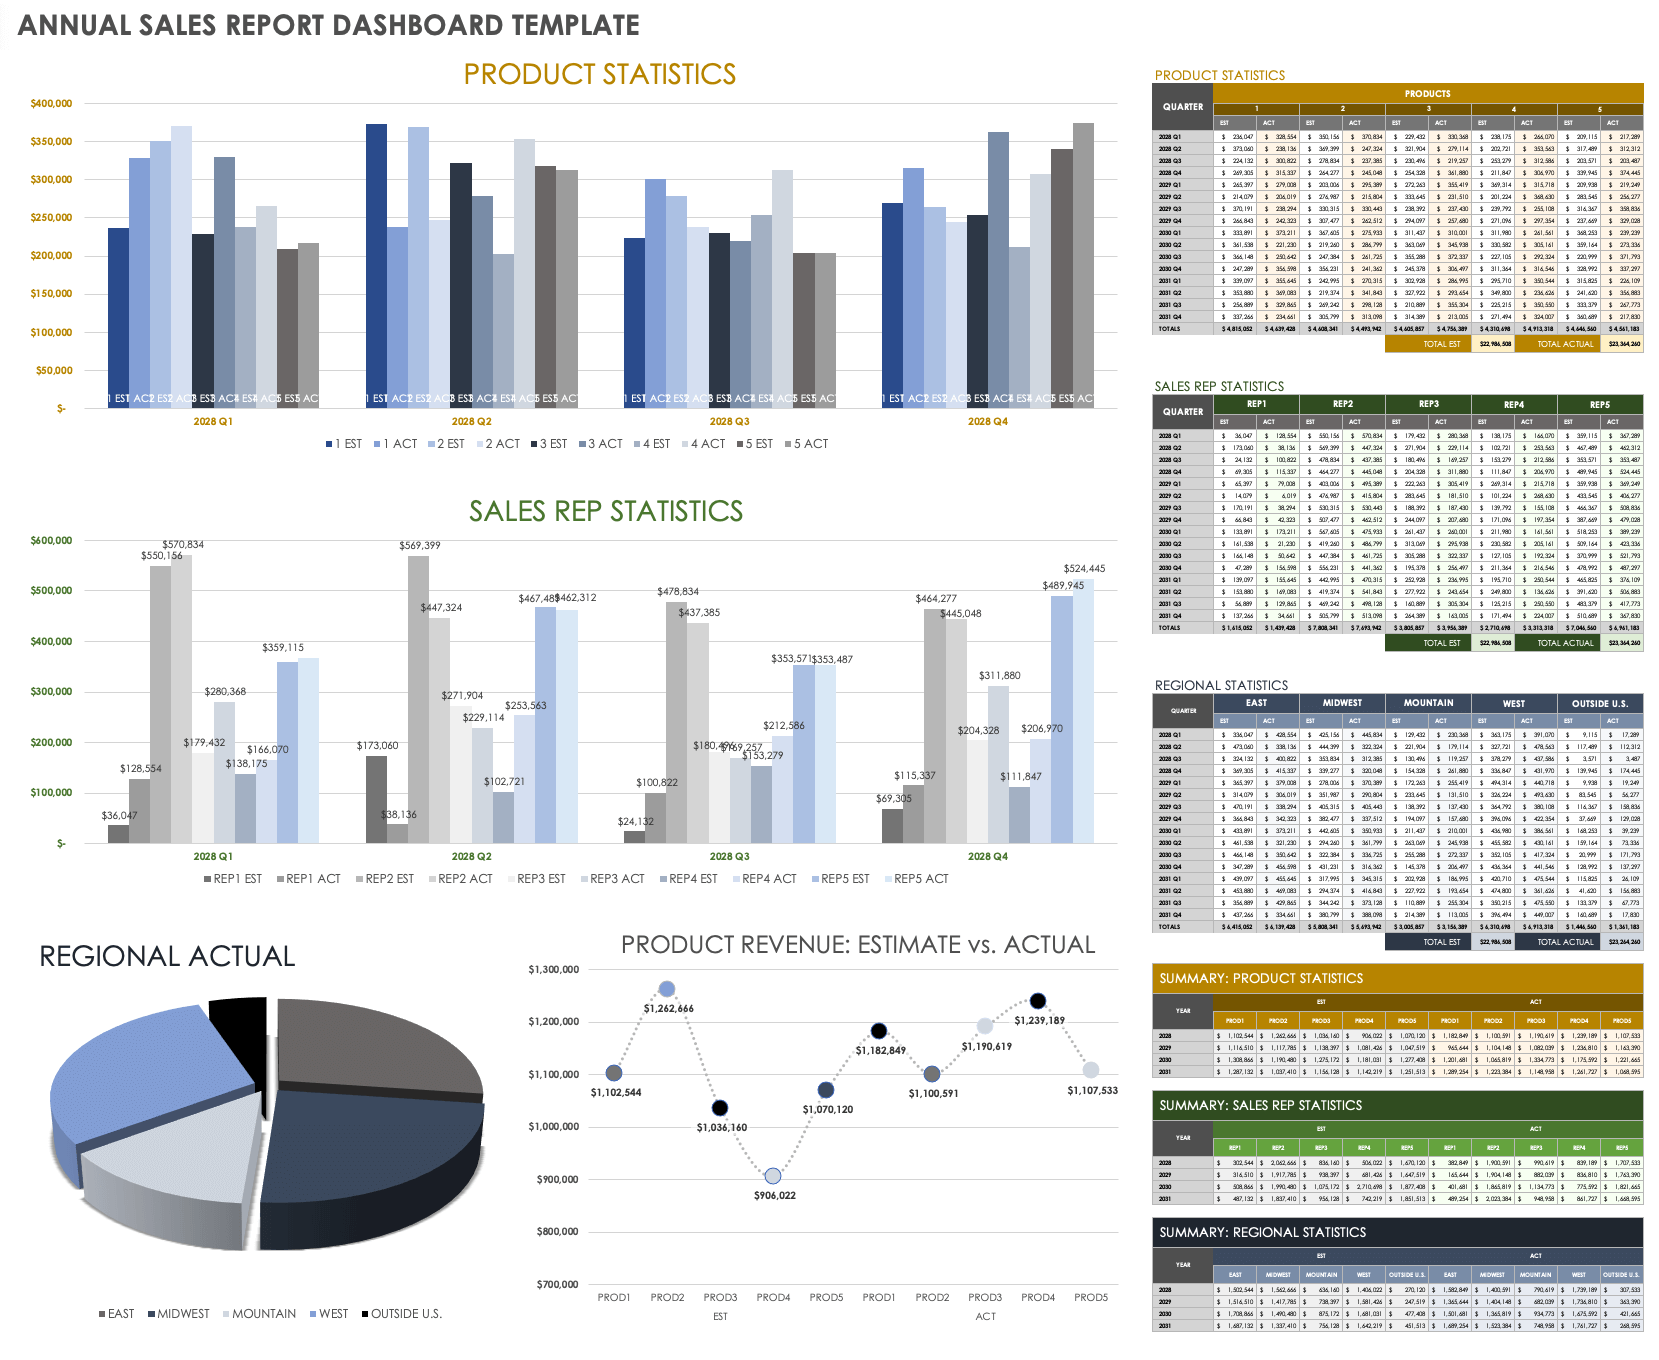 Annual Sales Report Dashboard Template